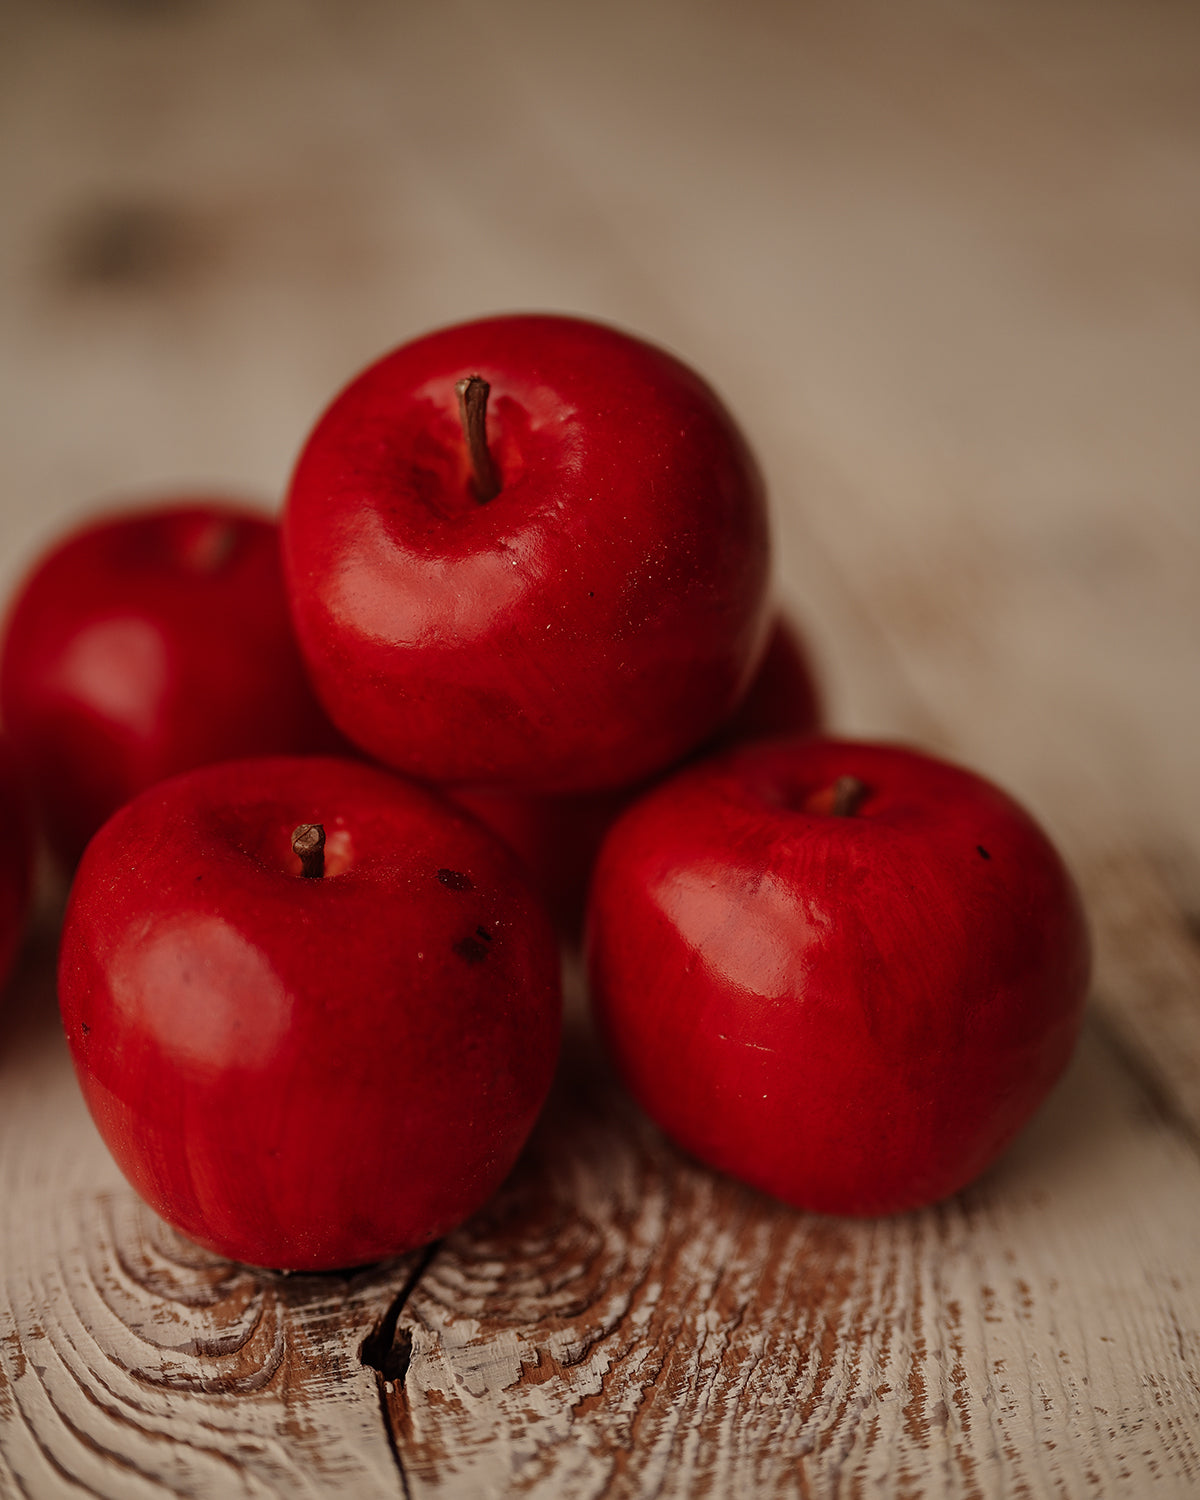 Super realistic red apples in life size